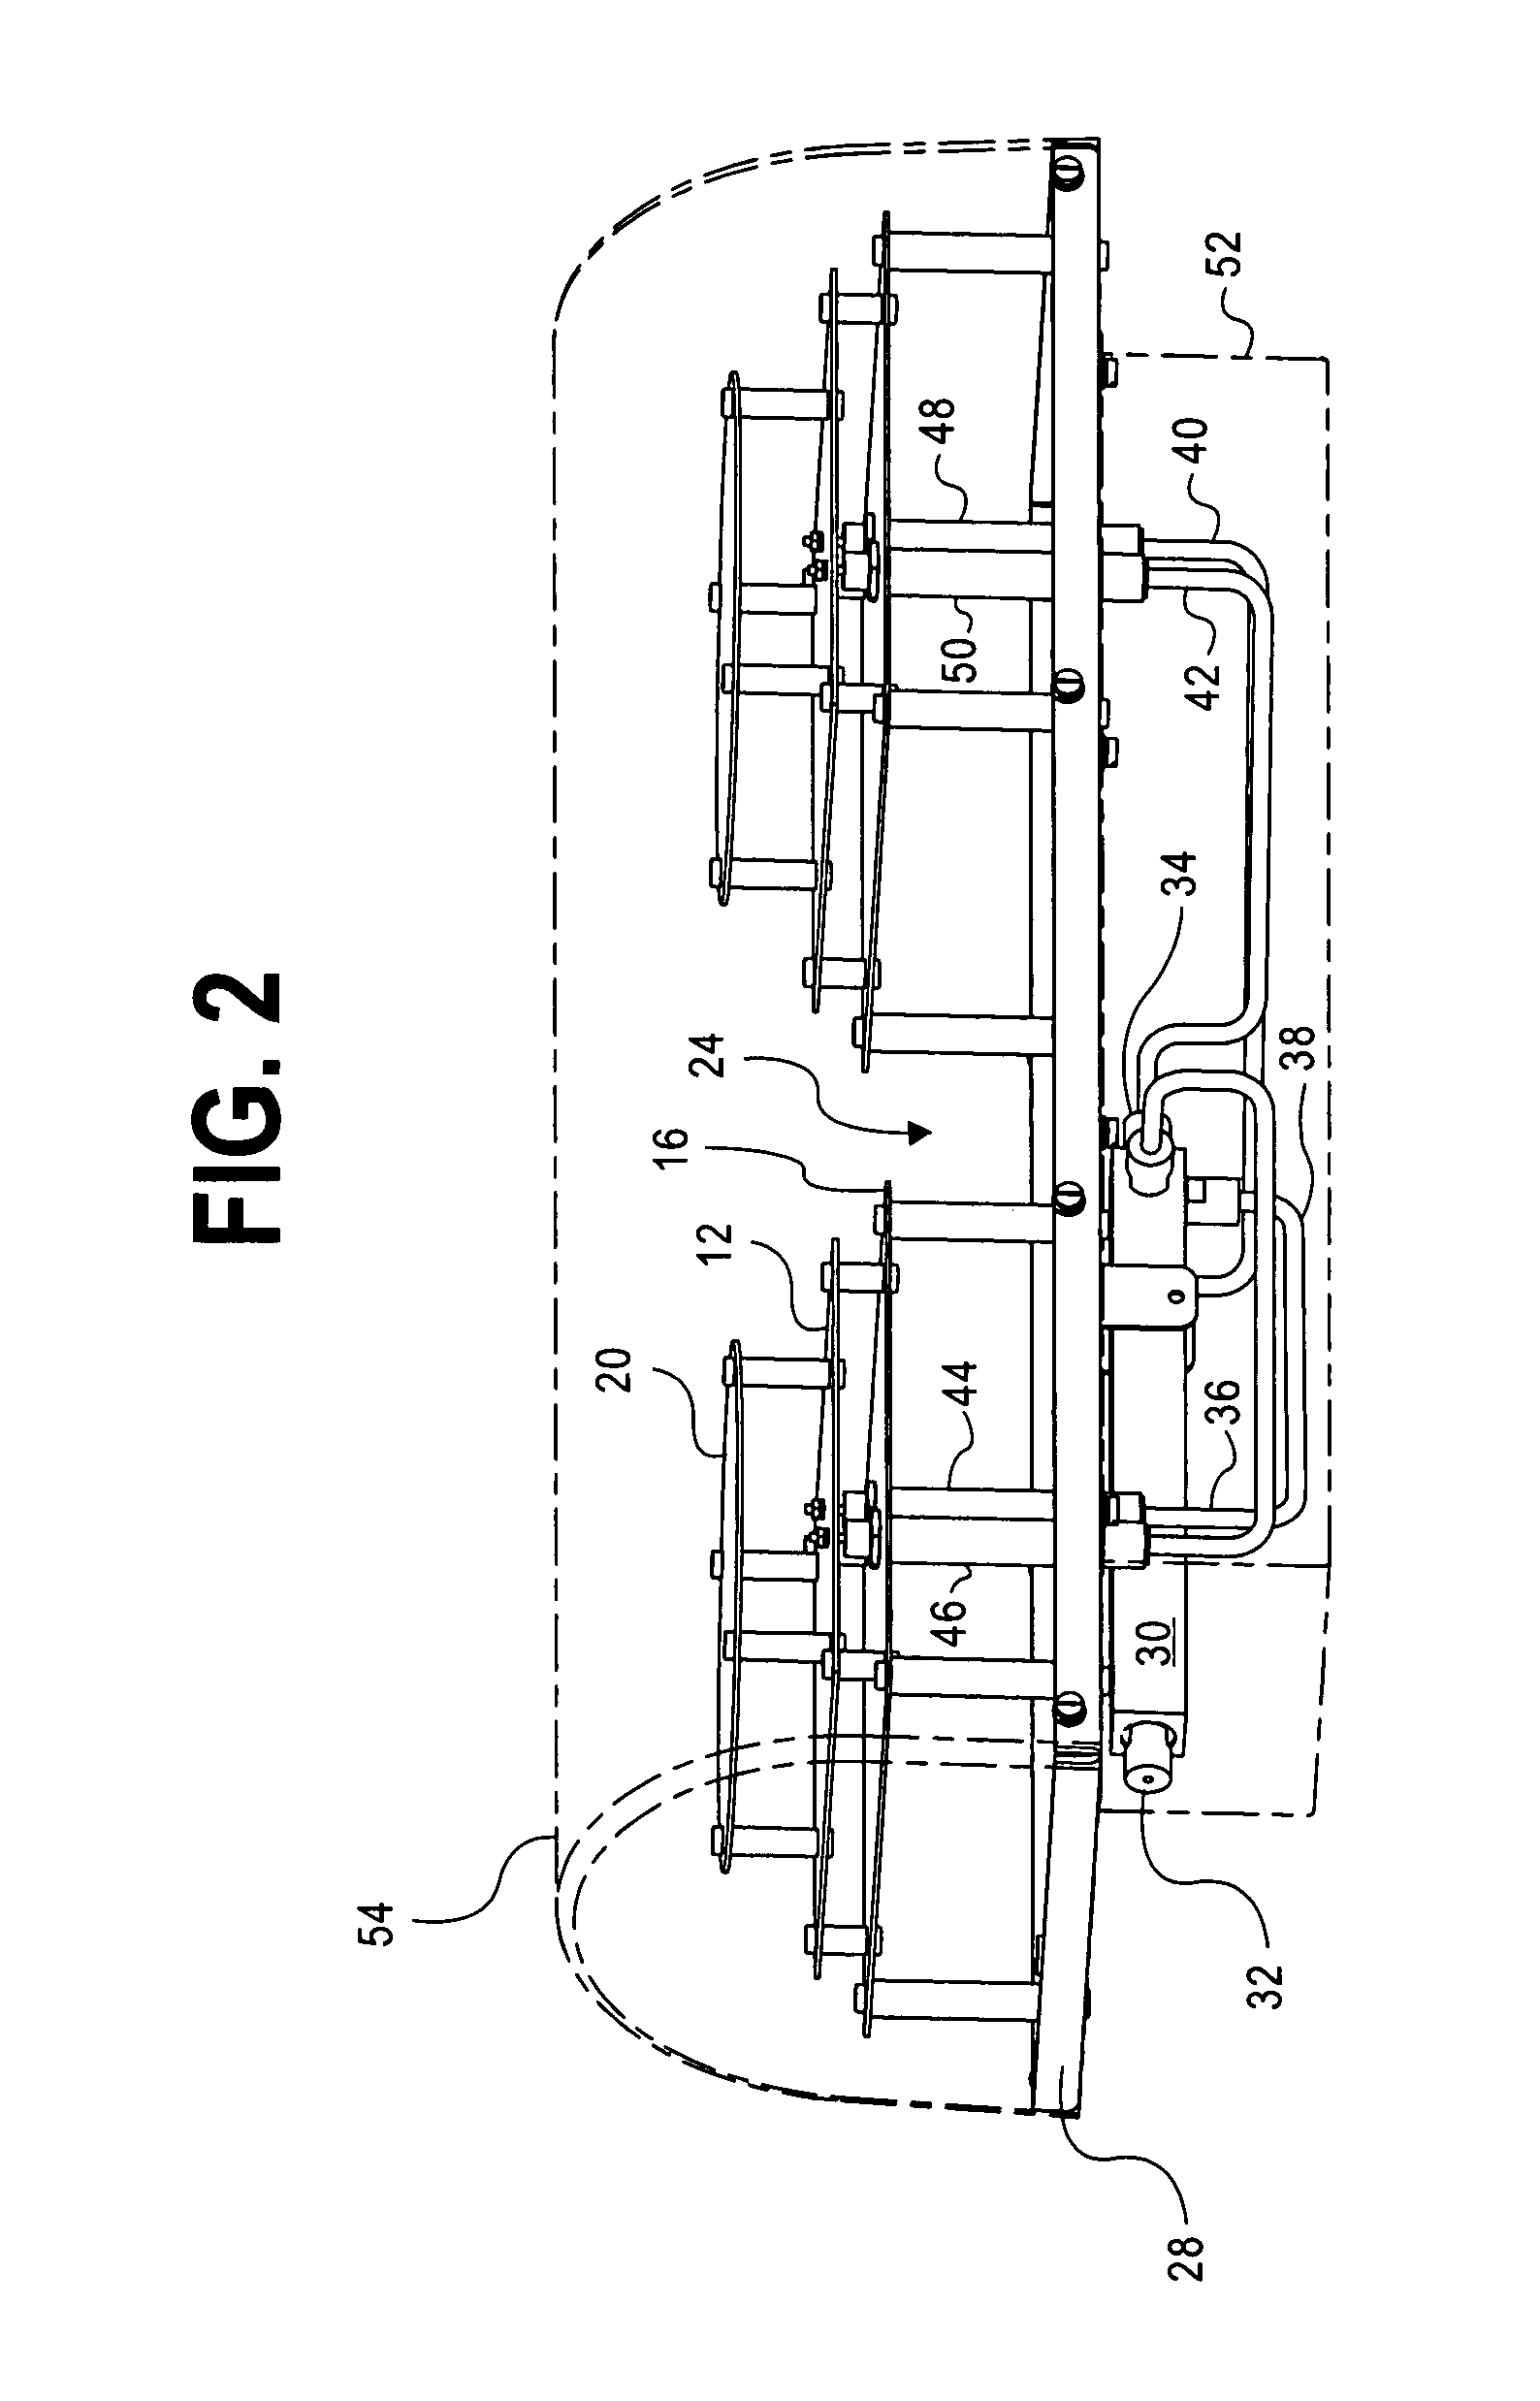 High-power-capable circularly polarized patch antenna apparatus and method